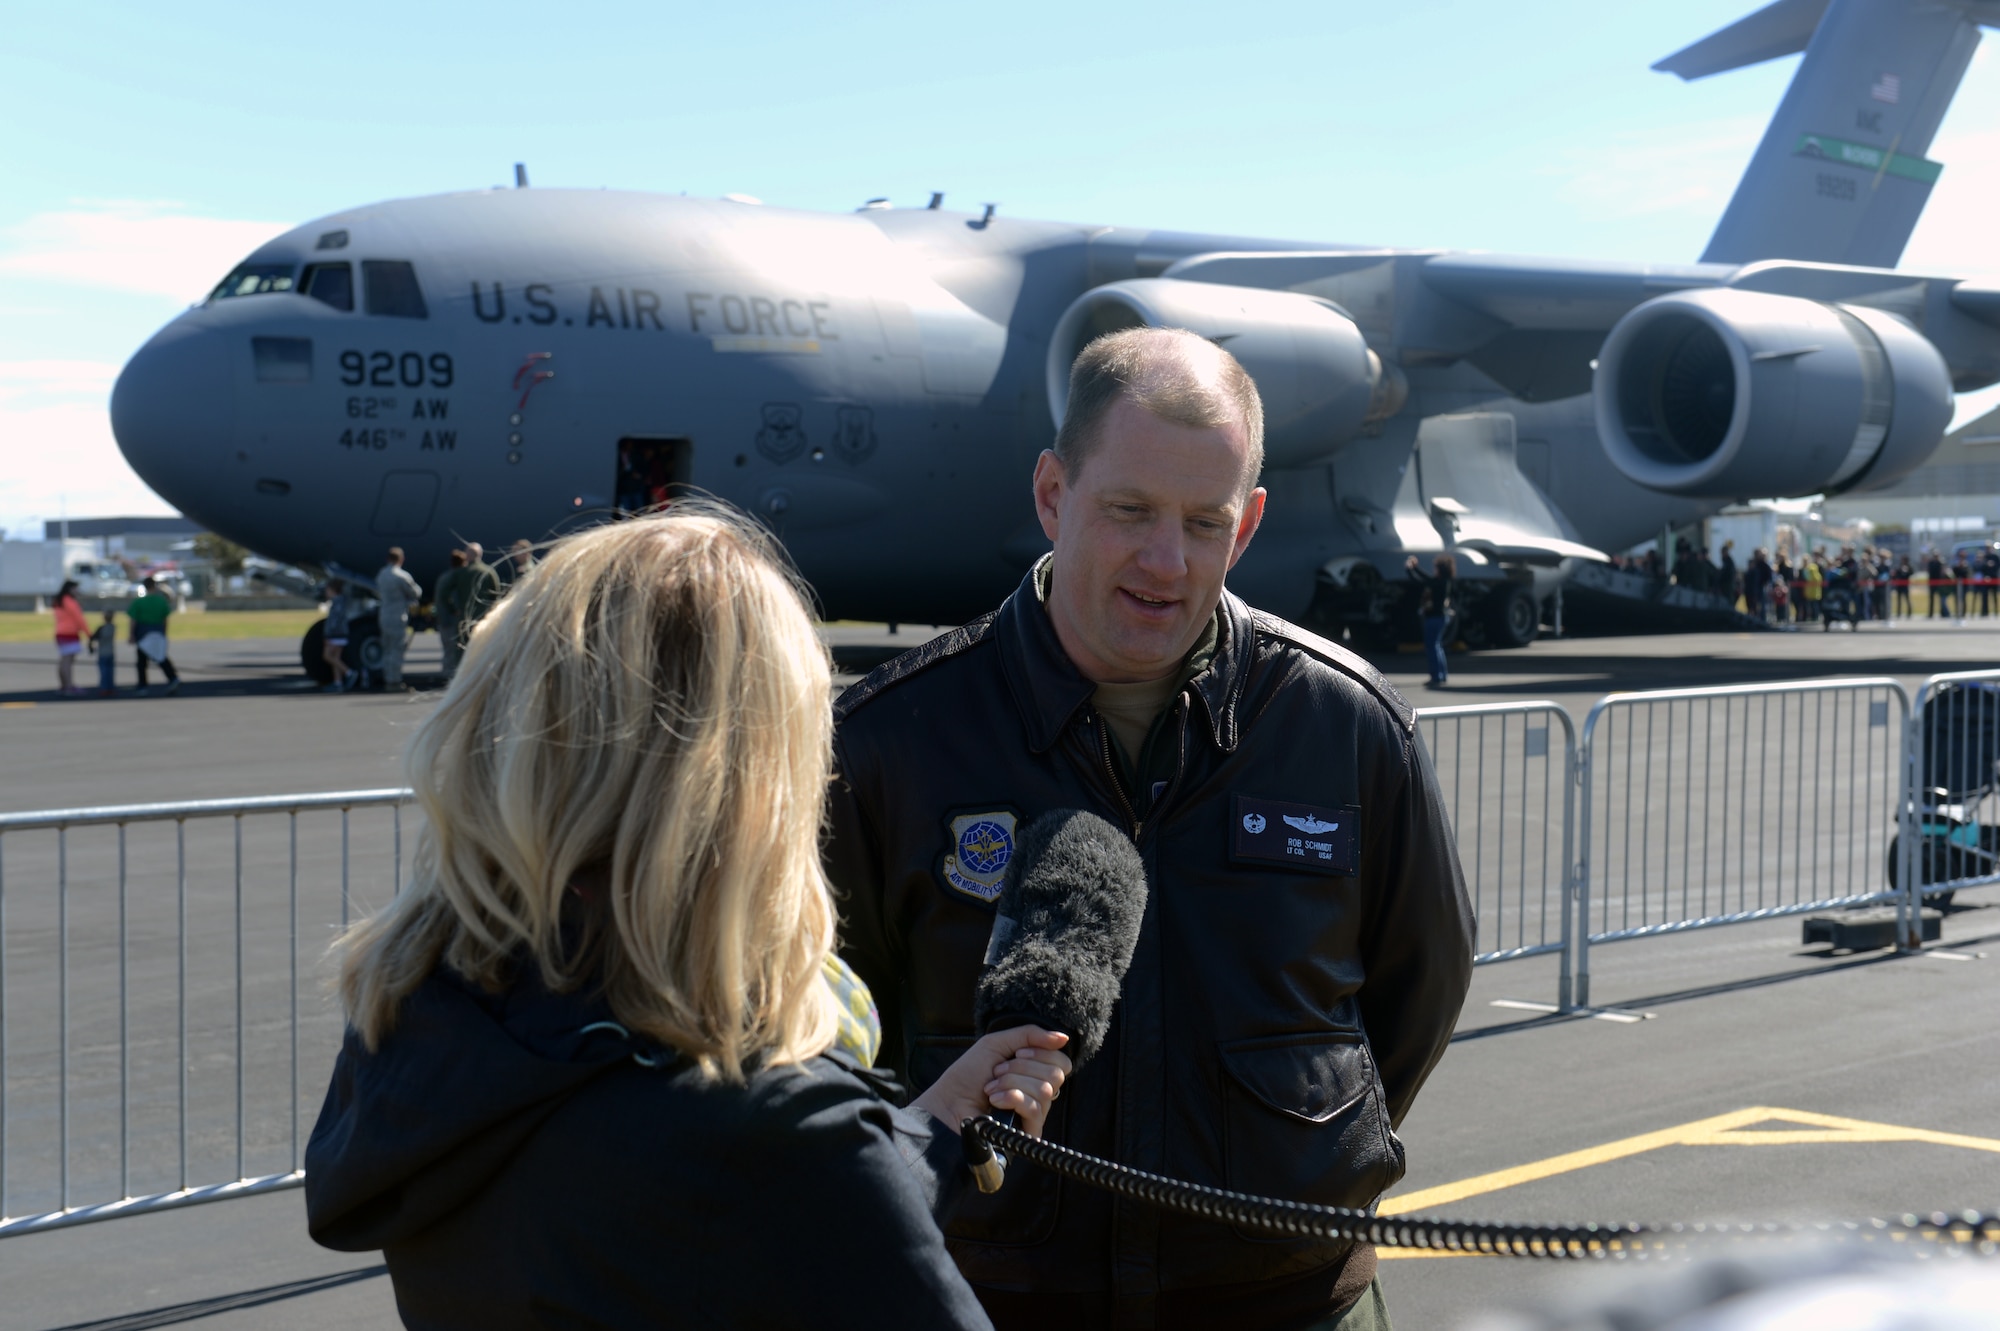 Lt. Col. Rob Schmidt talks with media in front of the C-17 Globemaster III, Oct. 5, 2014, as part of the U.S. Antarctic Program Day for IceFest 2014 at Christchurch, New Zealand. The day is used to educate the community members on the capabilities of the C-17 and allows them the first-hand experience of seeing the aircraft up close and personal. Schmidt is the 304th Expeditionary Airlift Squadron commander and 62nd Airlift Wing operations group deputy commander. (U.S. Air Force photo/Master Sgt. Todd Wivell)